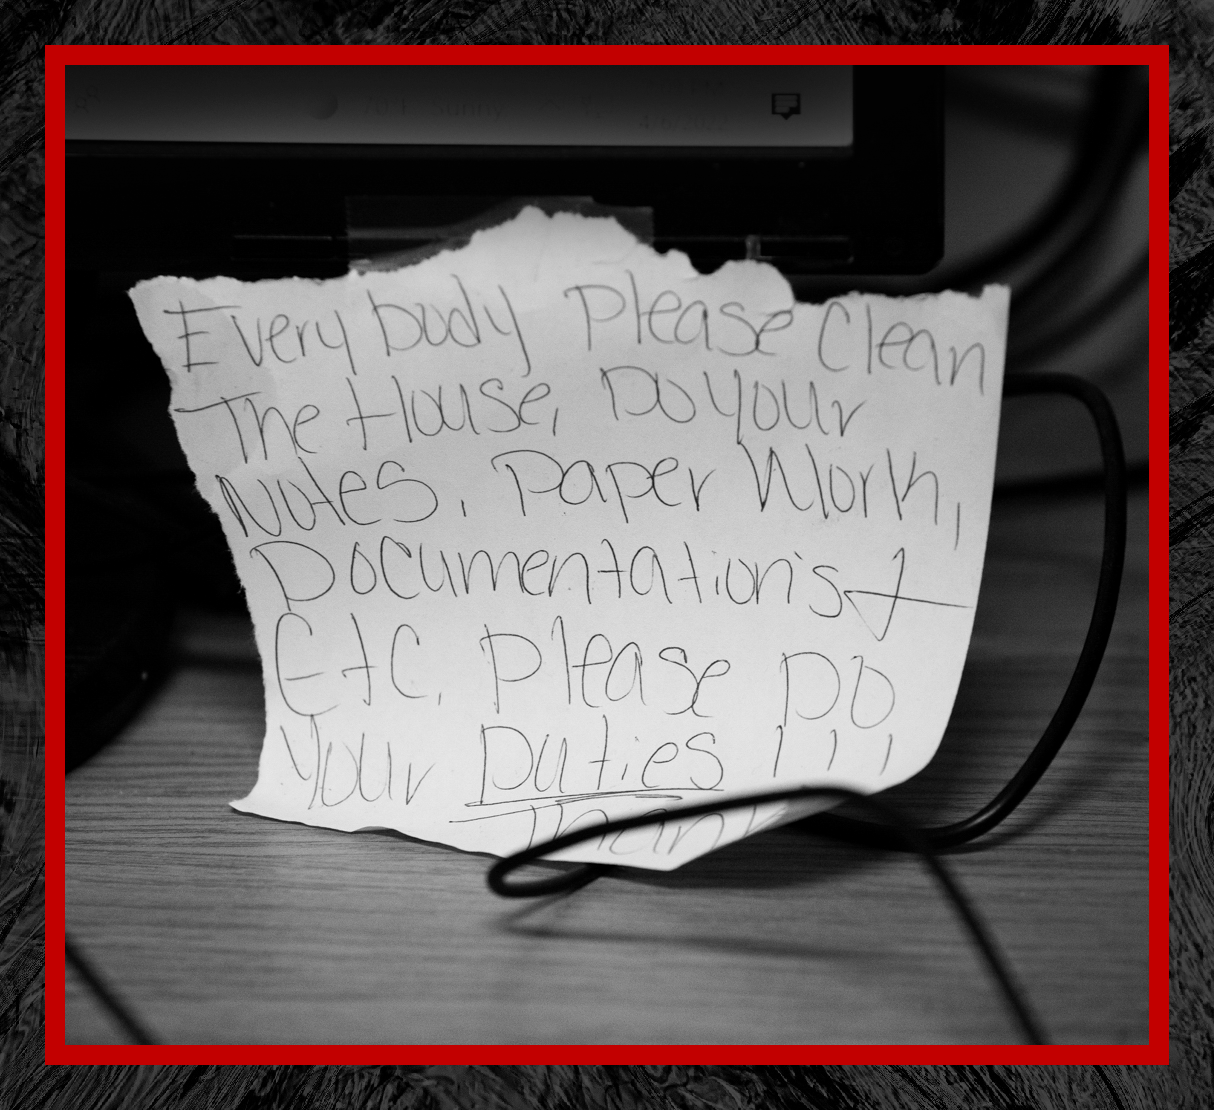 A black and white photo shows a torn piece of paper with a note on it from Tre'Asia Anderson to other staff reads: 